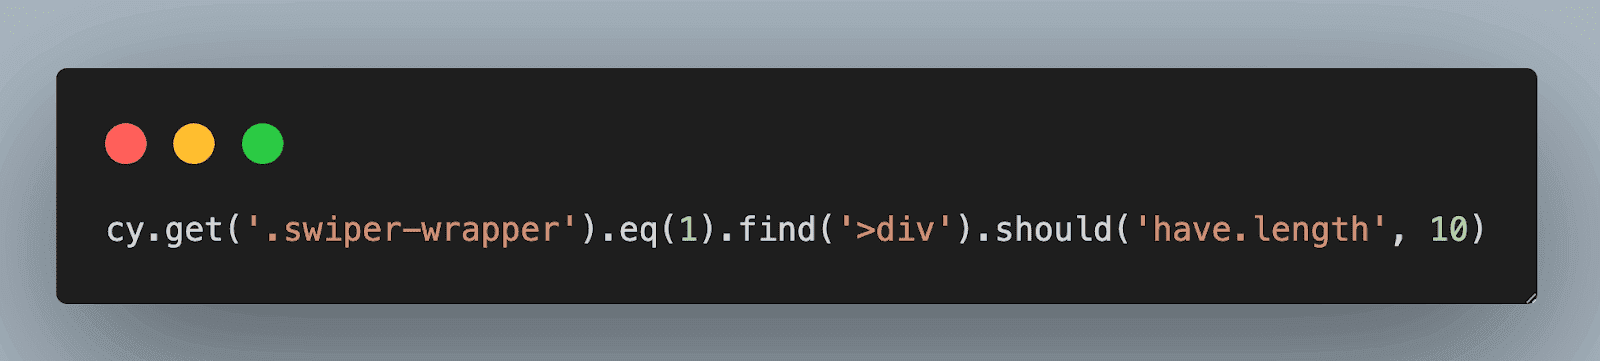 cy.get(‘.swiper-wrapper’).eq(1).find(‘>div’).should(‘have.length’, 10) 